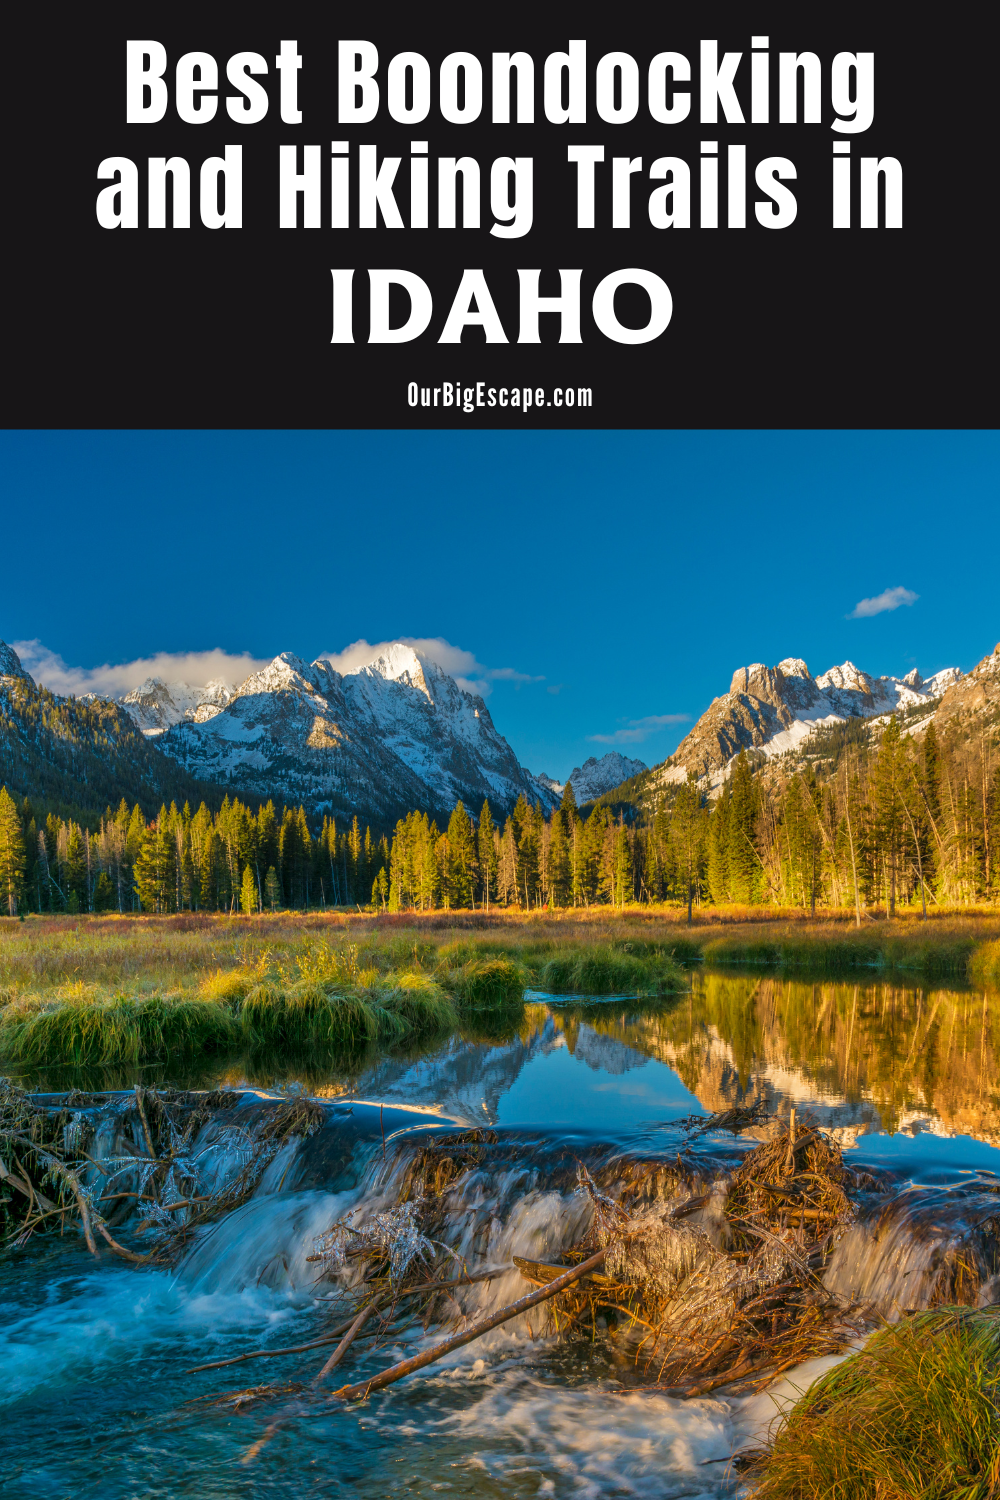 Best Boondocking and Hiking Trails in Idaho